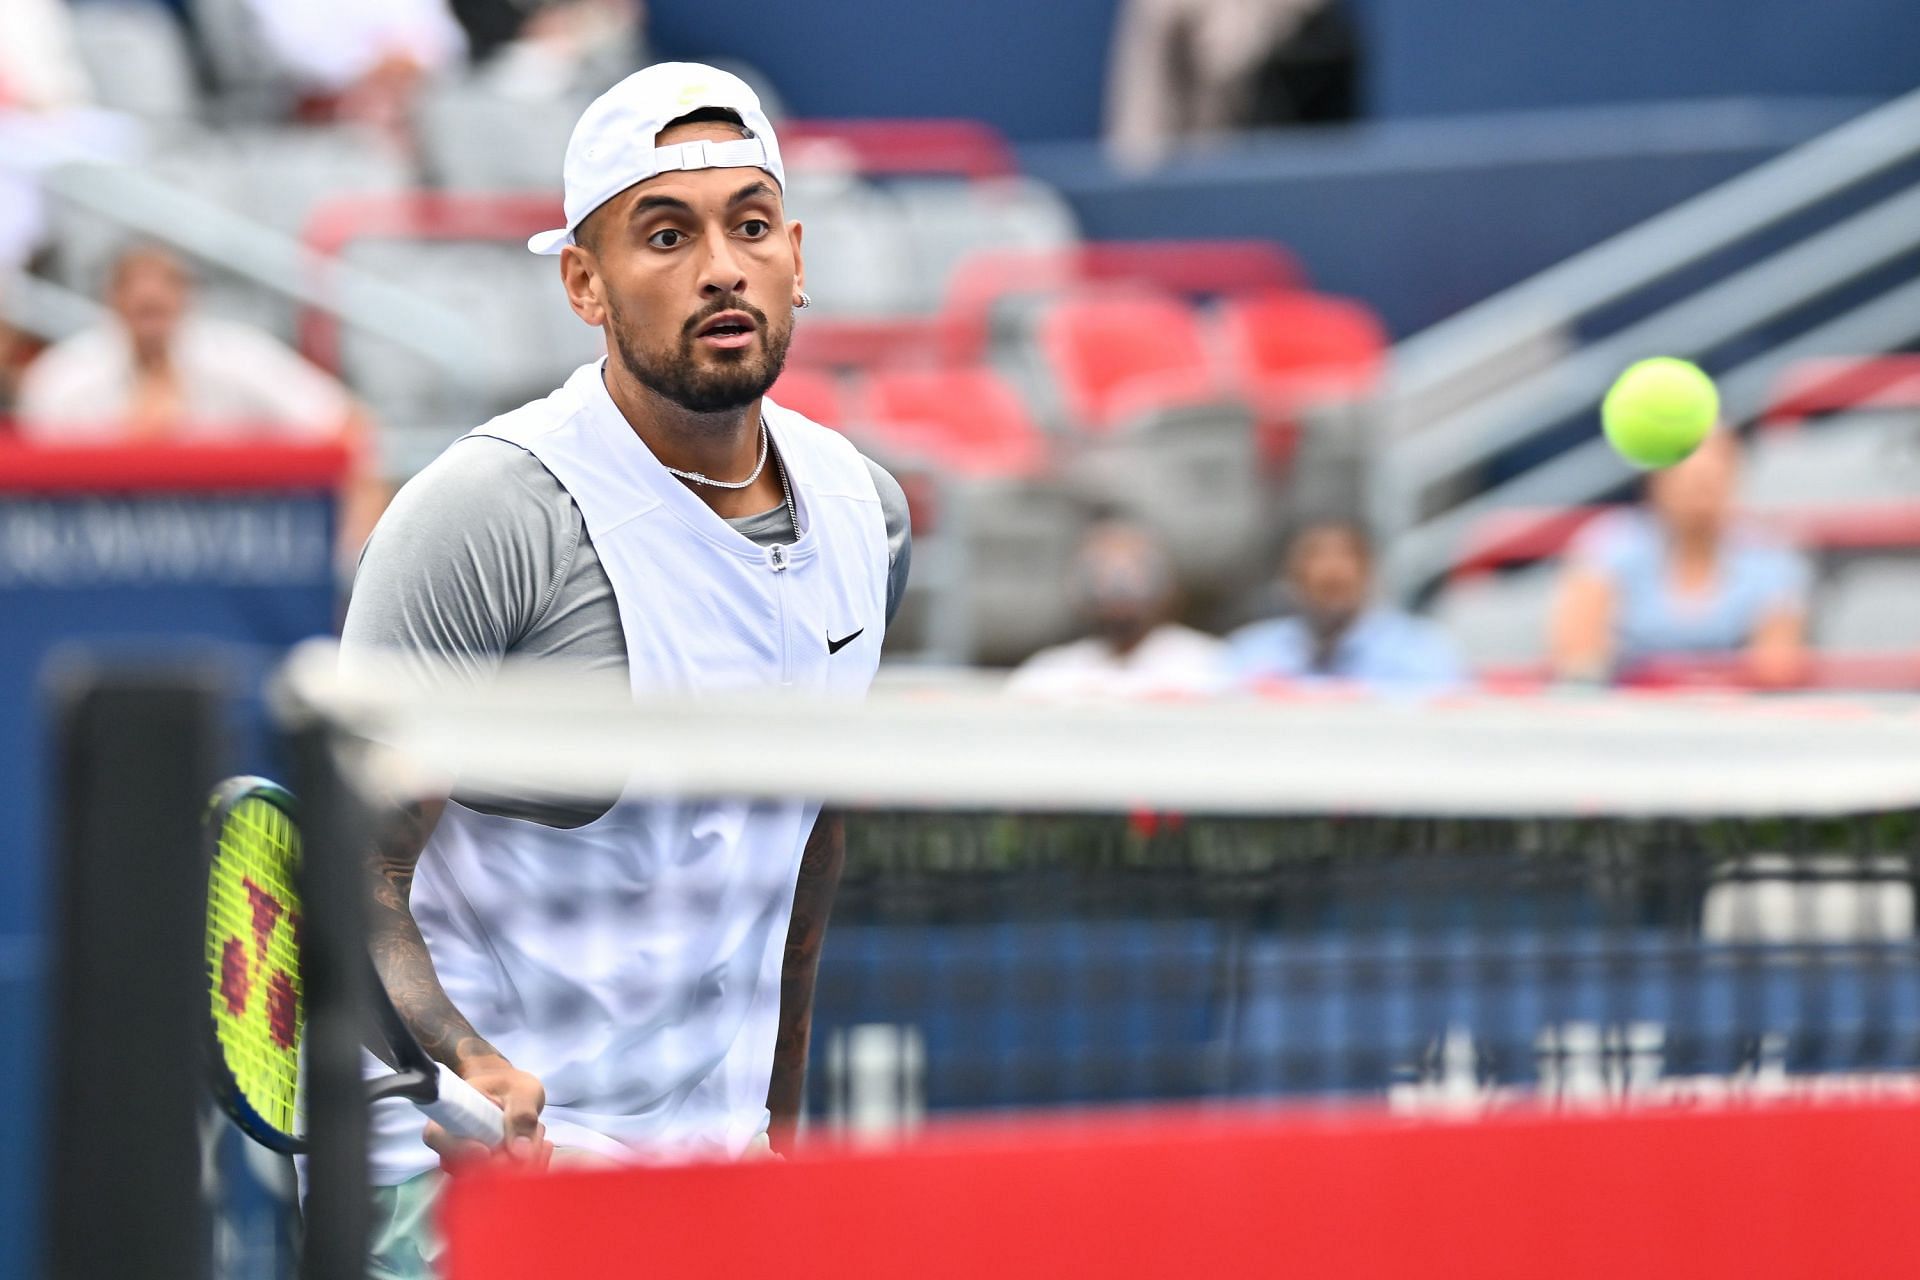 Nick Kyrgios at the Canadian Open